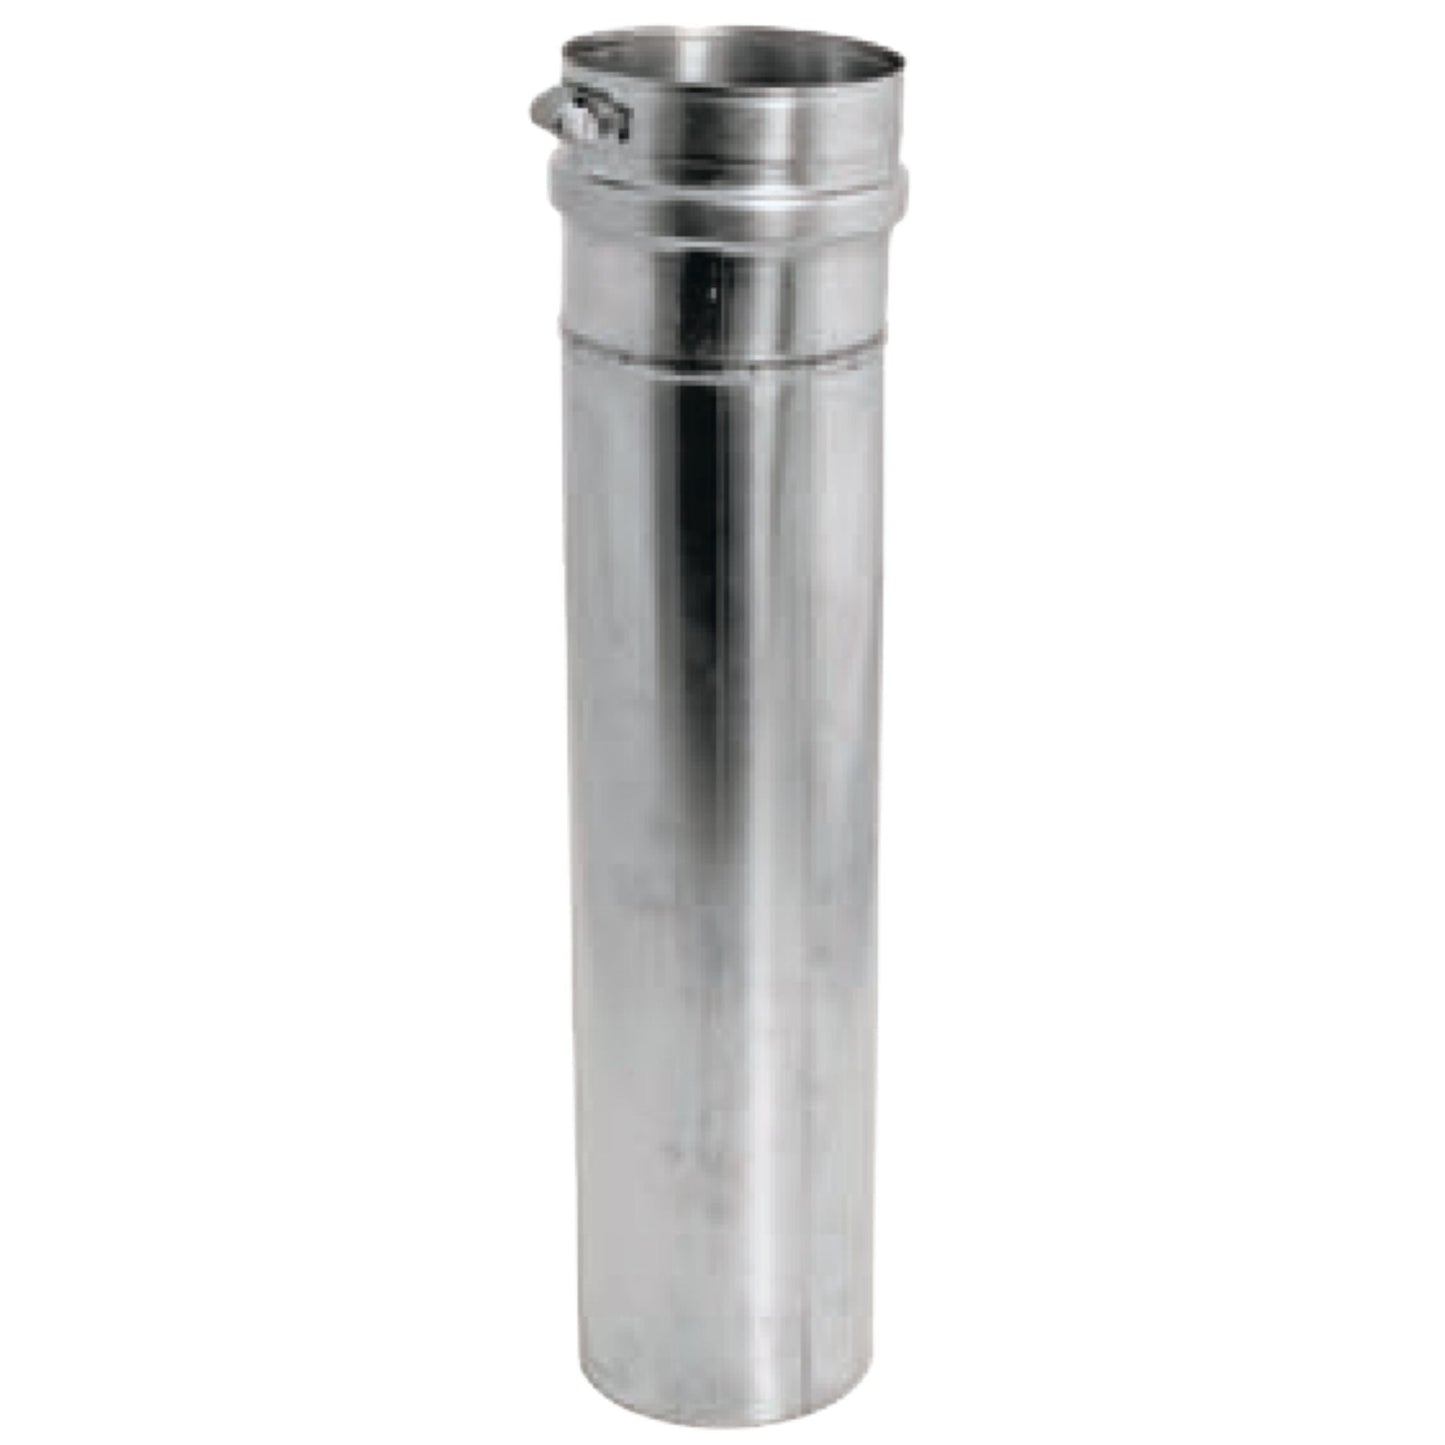 DuraVent FasNSeal 5" 2 Degree 29-4C Stainless Steel Adjustable Vent Length